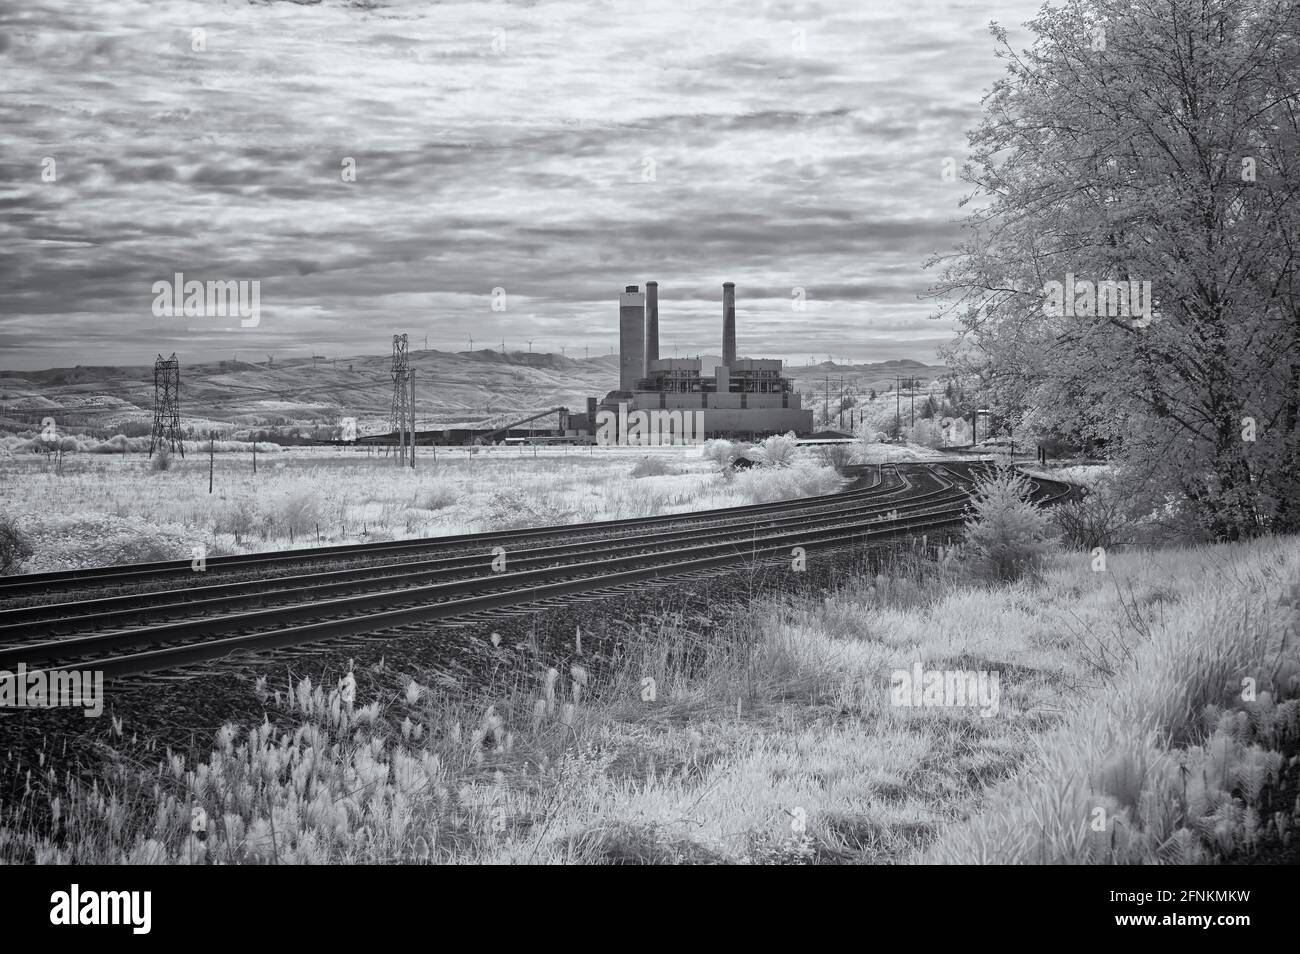 The Centralia Steam Plant electric generating station iwith its wind turbine replacements in teh background. Stock Photo